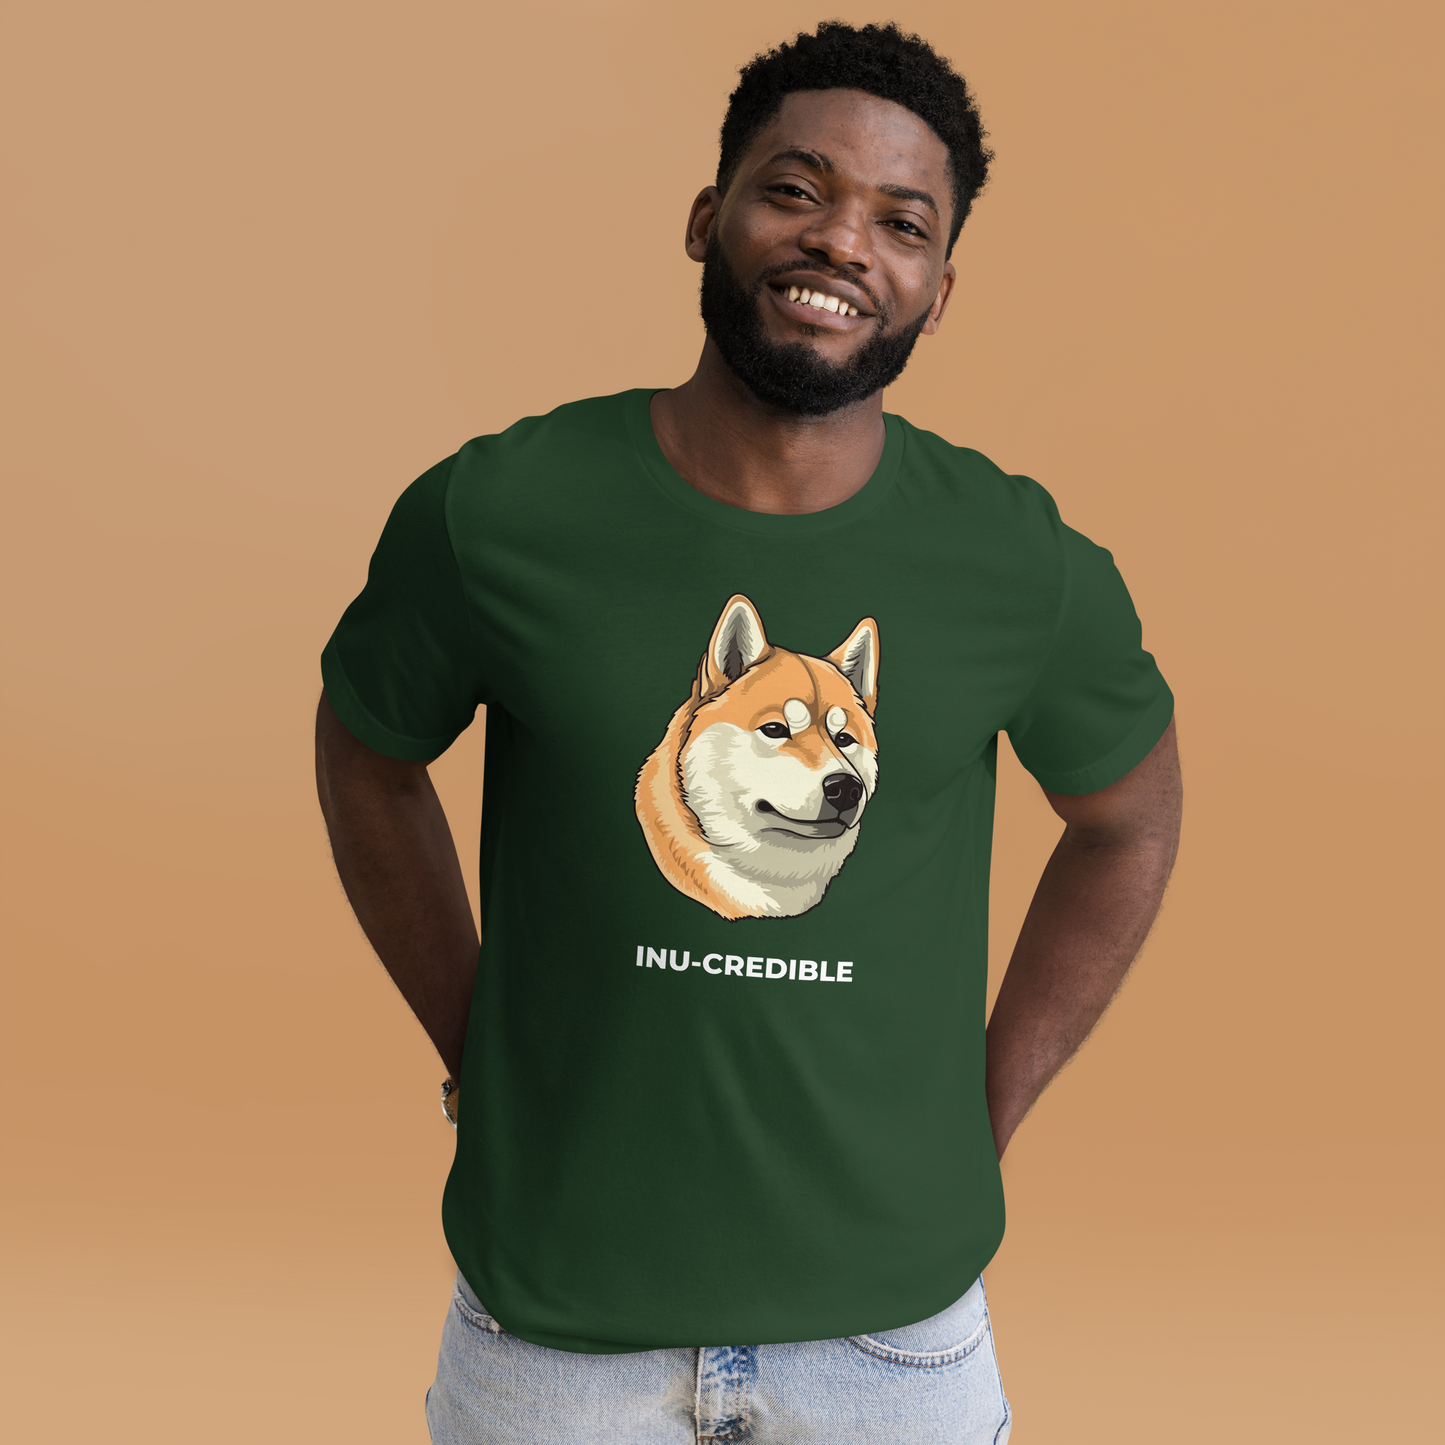 Smiling man wearing a Forest Green Premium Shiba Inu T-Shirt featuring the Inu-Credible graphic on the chest - Funny Graphic Shiba Inu Tees - Boozy Fox